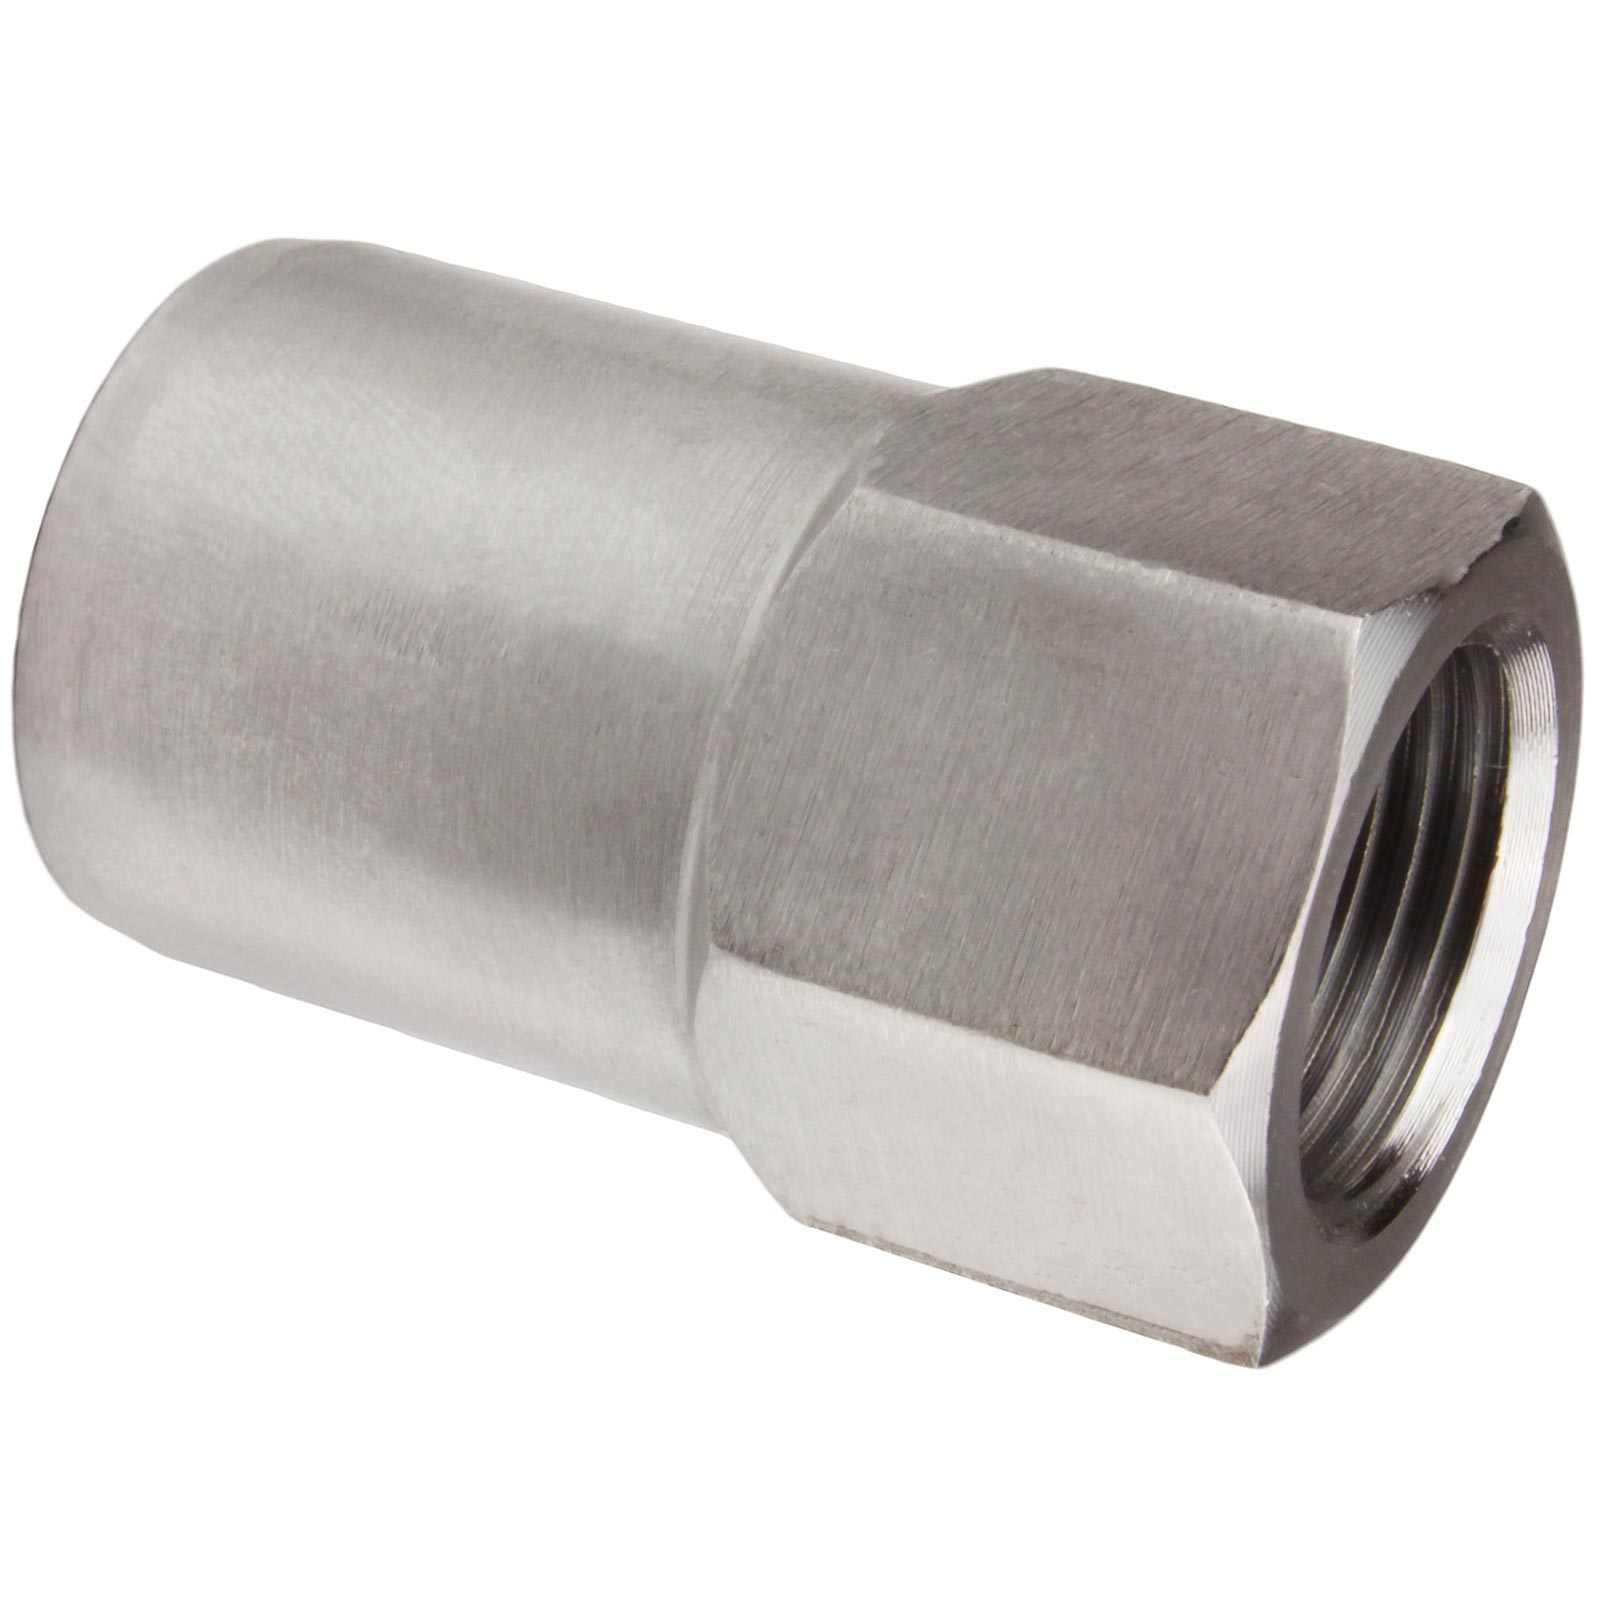 Heim Joint Tube Adapter 3/8-24 RH Thread for 3/4 Inch Diameter by .058 Wall Tube